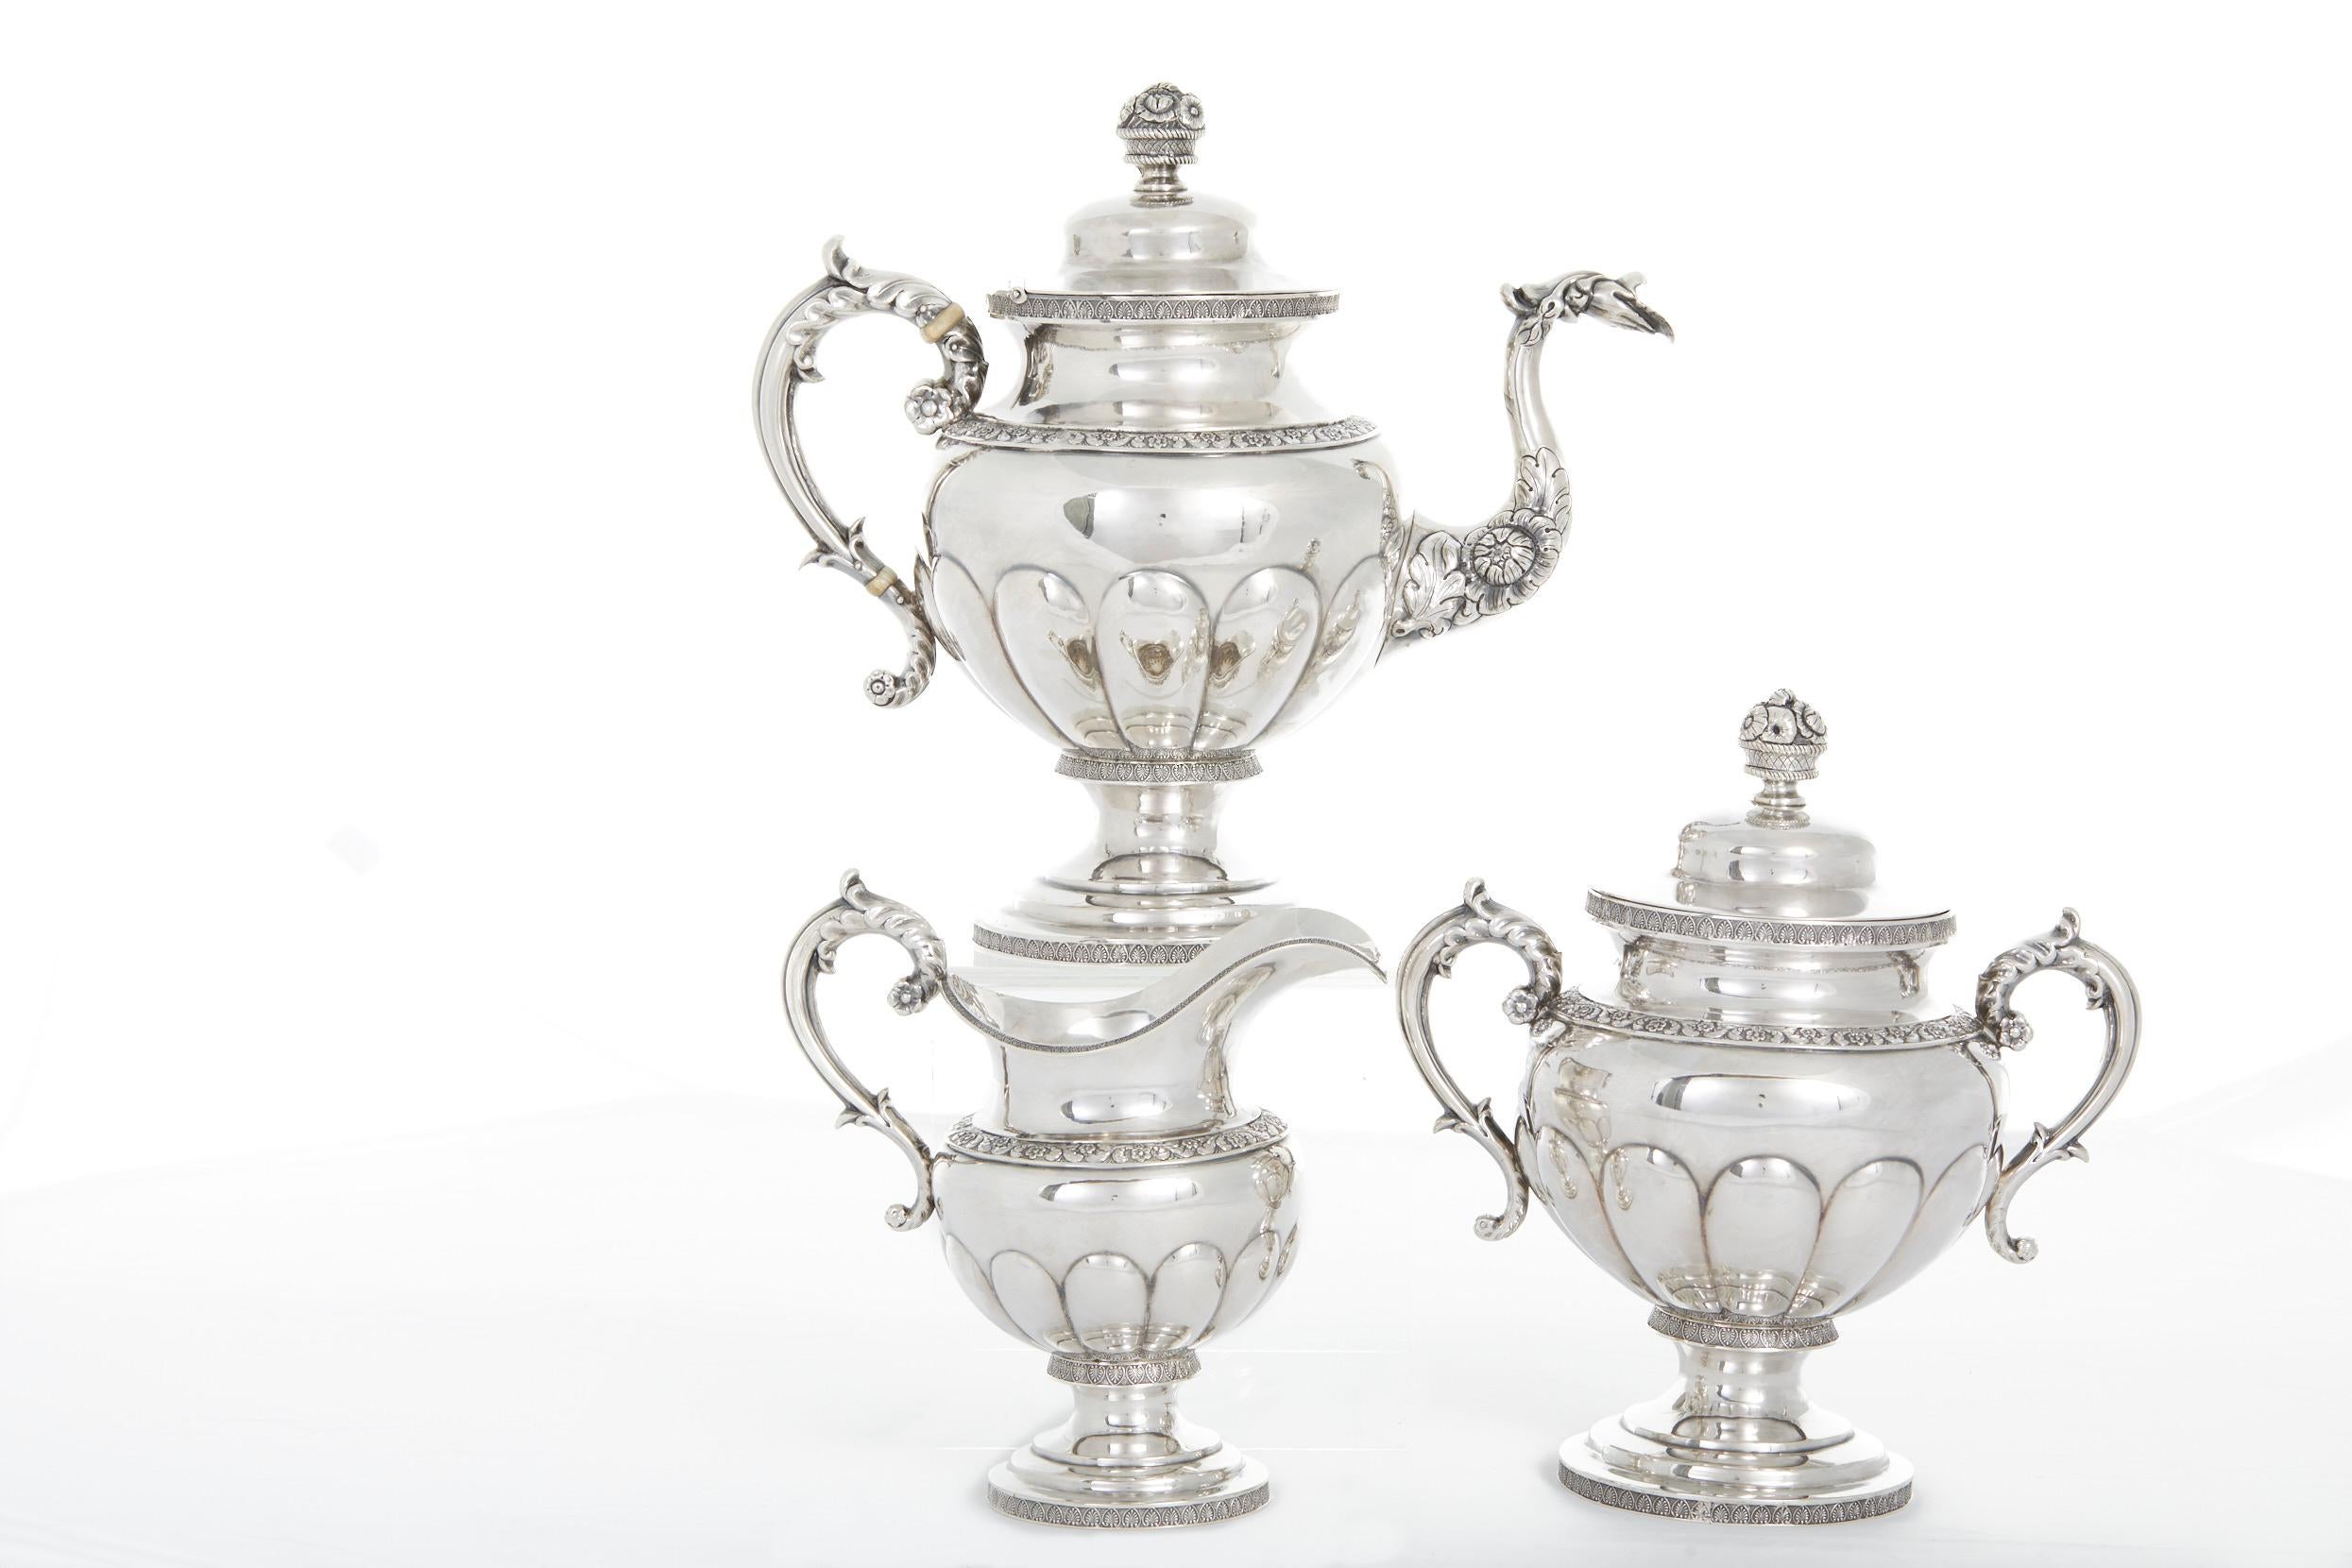 Beautiful American coin silver 3 -piece tea and coffee service in the manner of Thomas Whartenby Pennsylvania, Circa 1816-1818.
Thomas Whartenby and Peter Bumm were independently successful silversmiths in Philadelphia who worked together to create